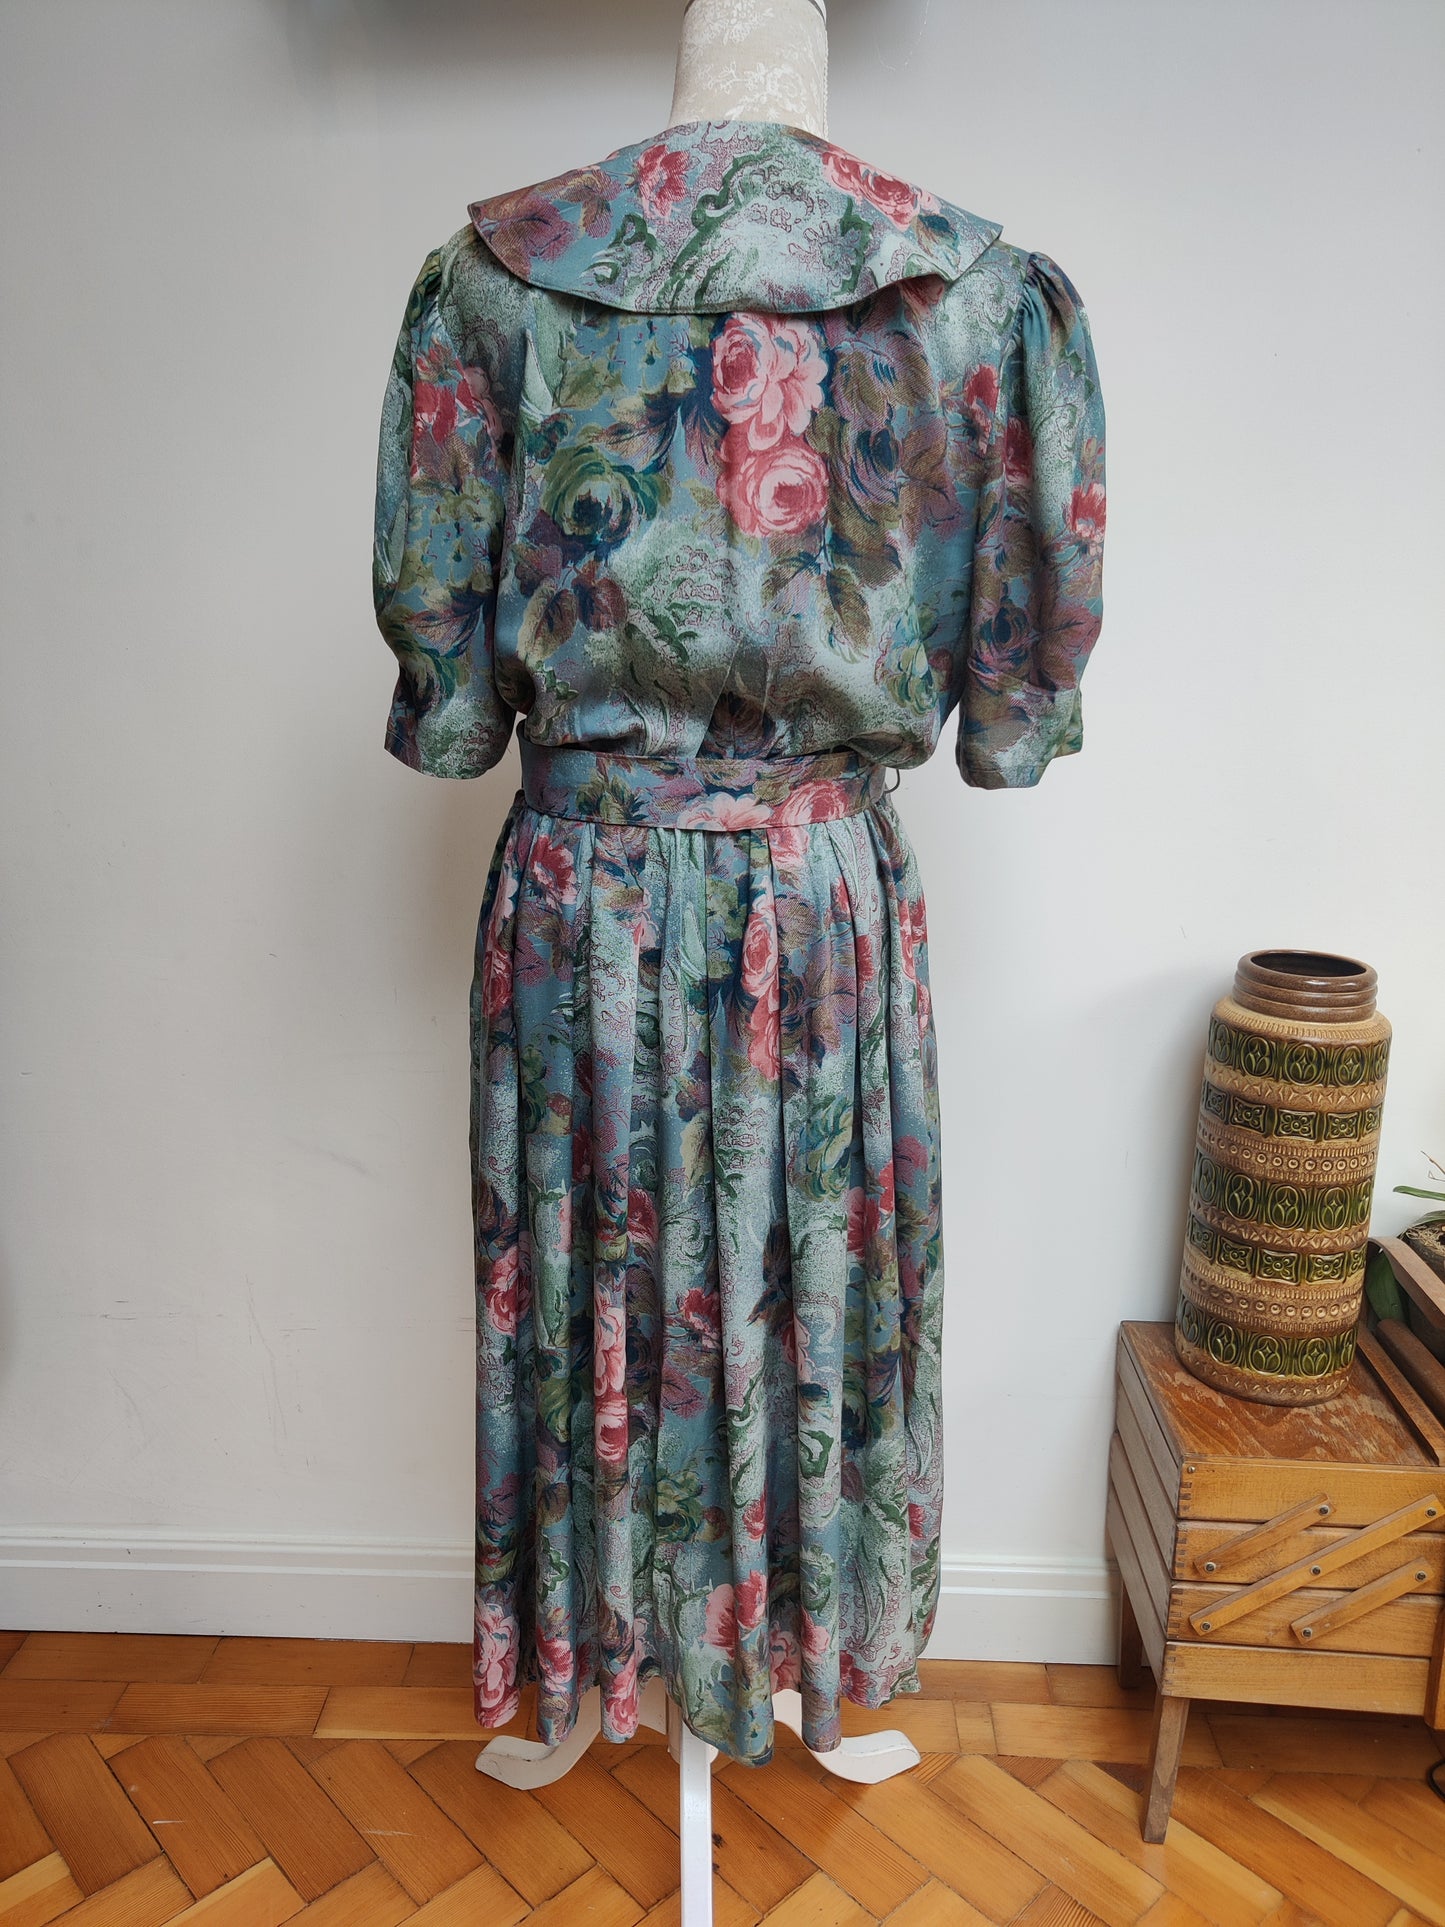 Laura Ashley style 80s dress with sailor collar